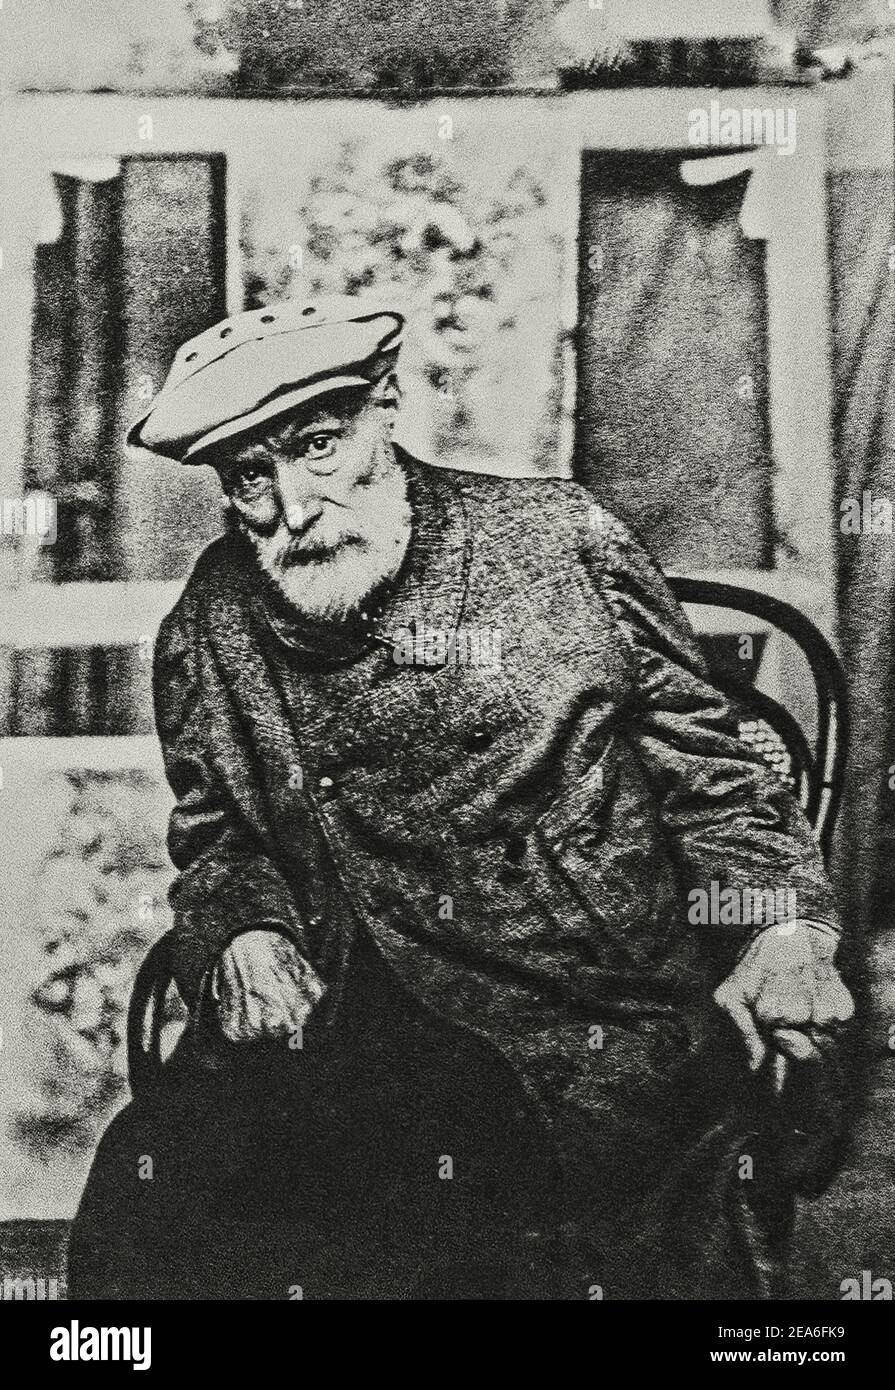 Retro photo of Pierre-Auguste Renoir. Pierre-Auguste Renoir (1841 – 1919), was a French artist who was a leading painter in the development of the Imp Stock Photo